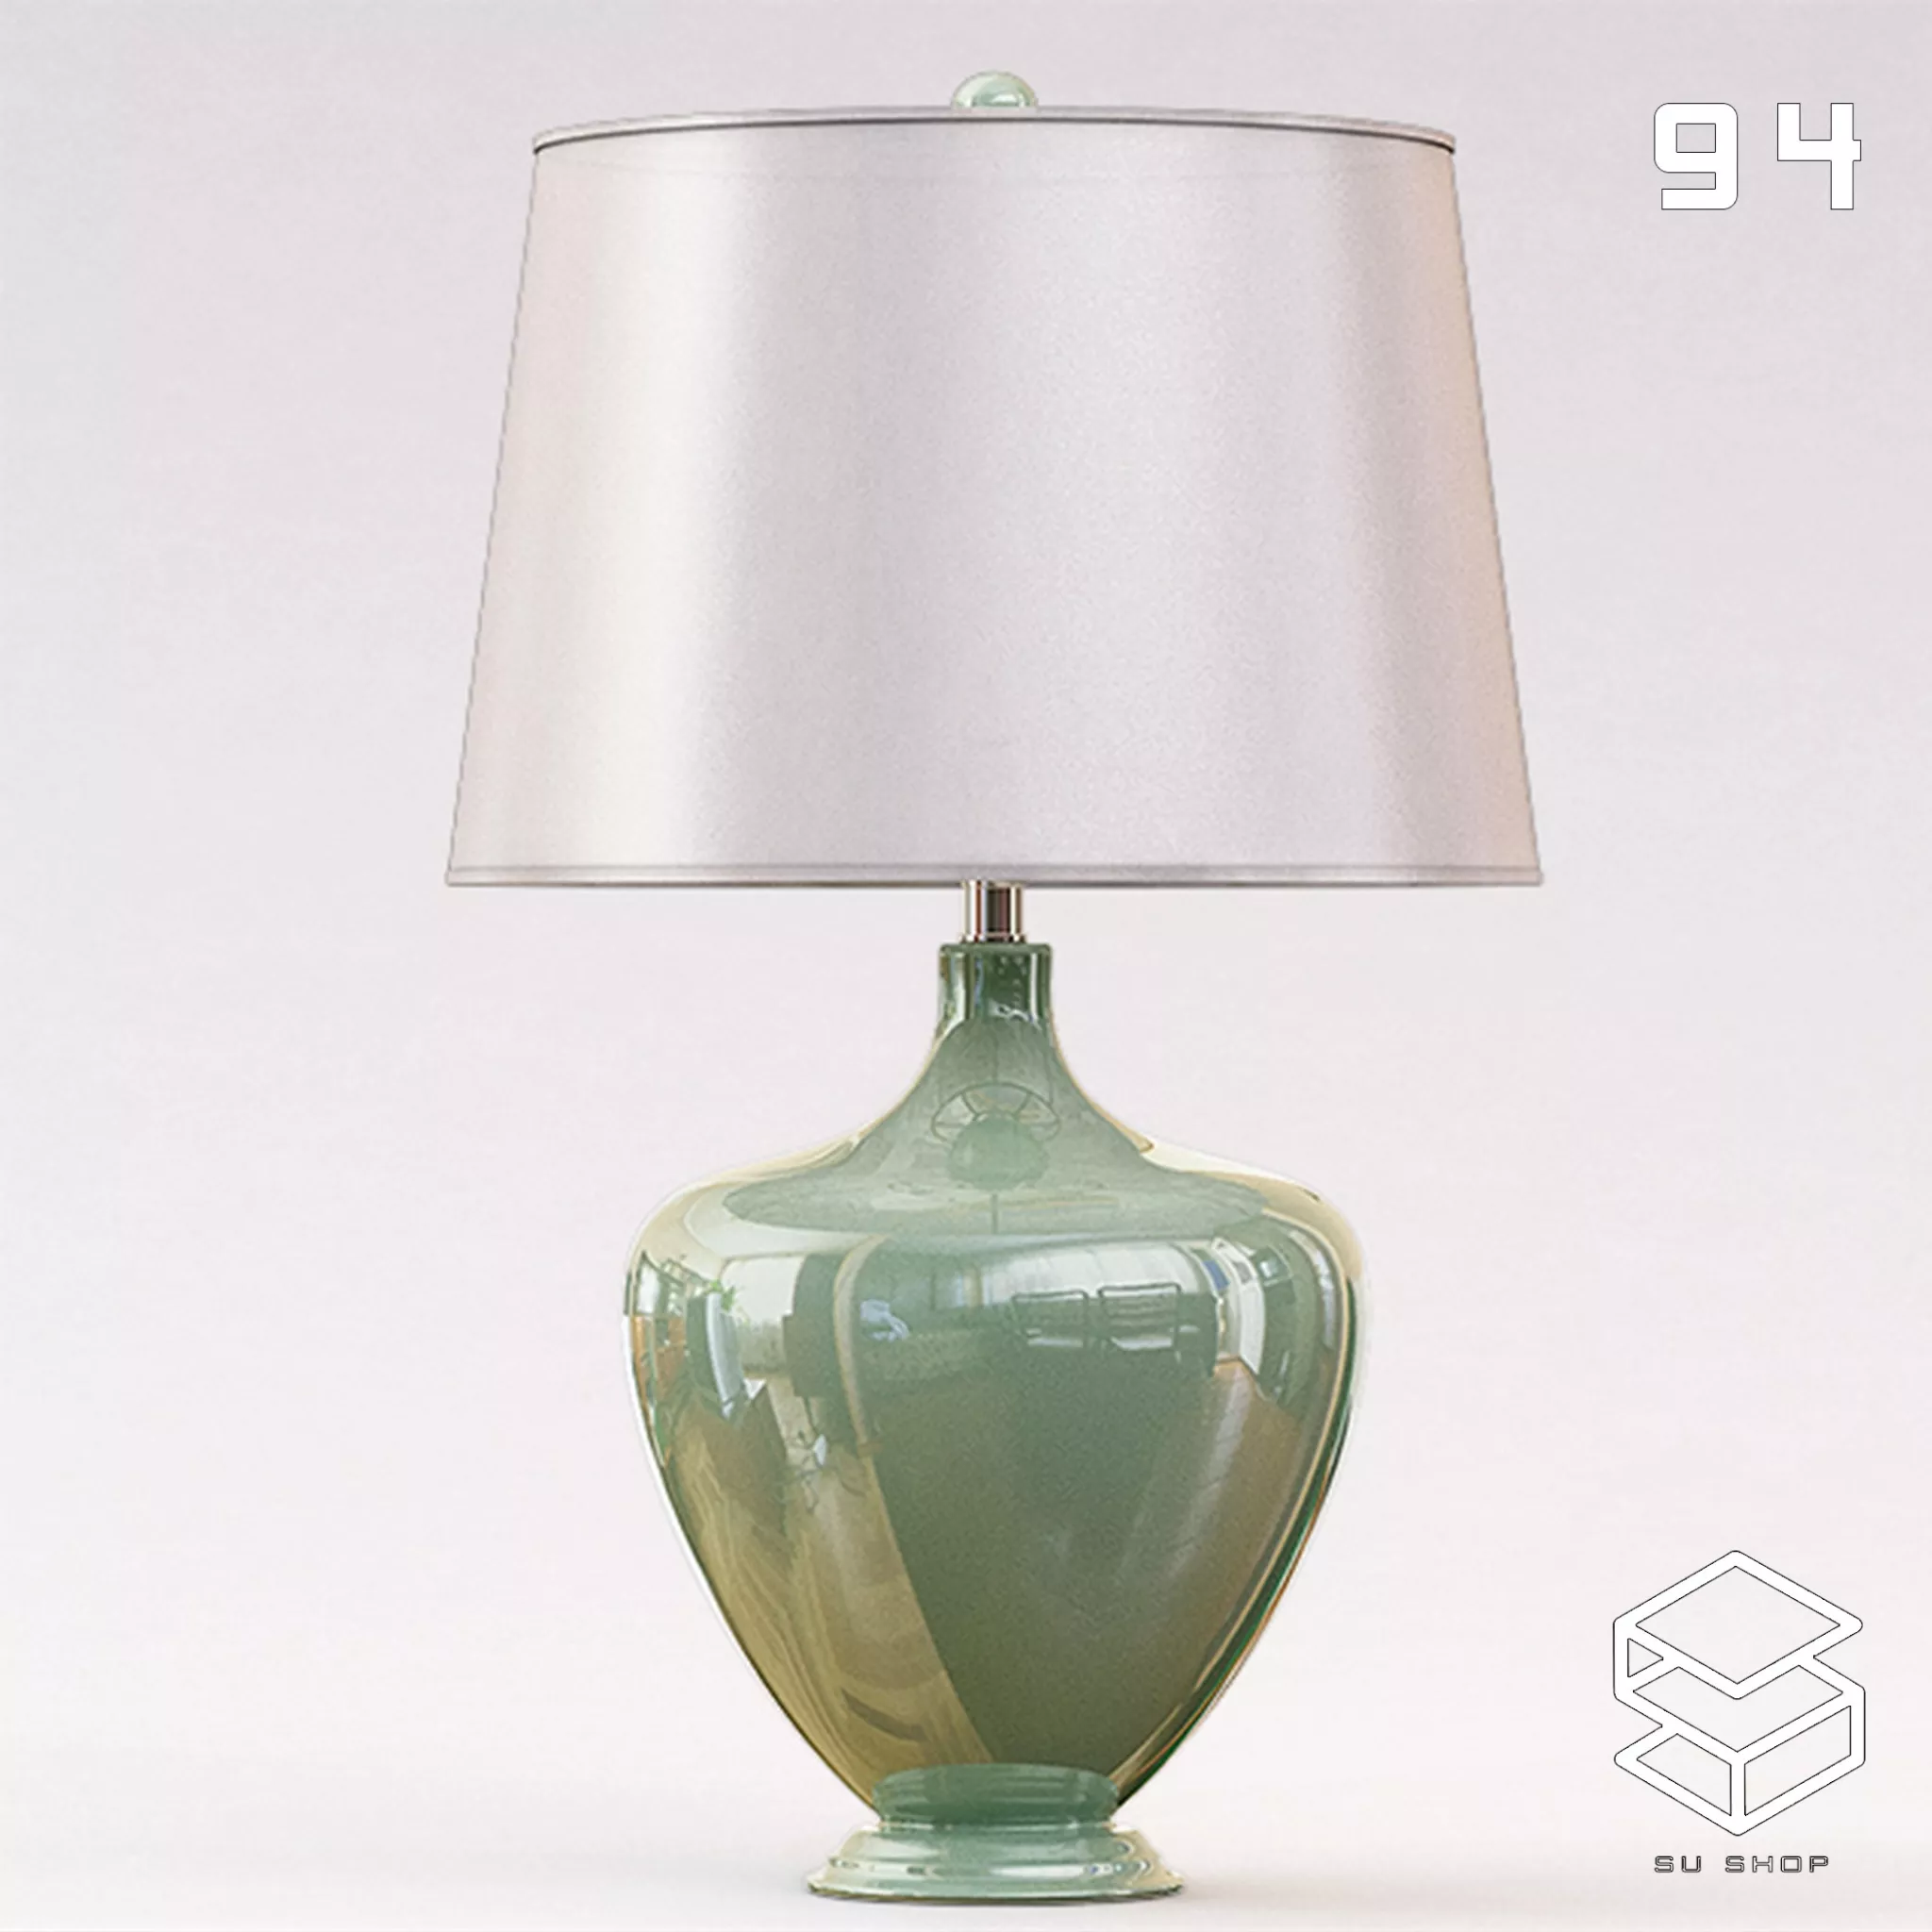 MODERN TABLE LAMP - SKETCHUP 3D MODEL - VRAY OR ENSCAPE - ID14893